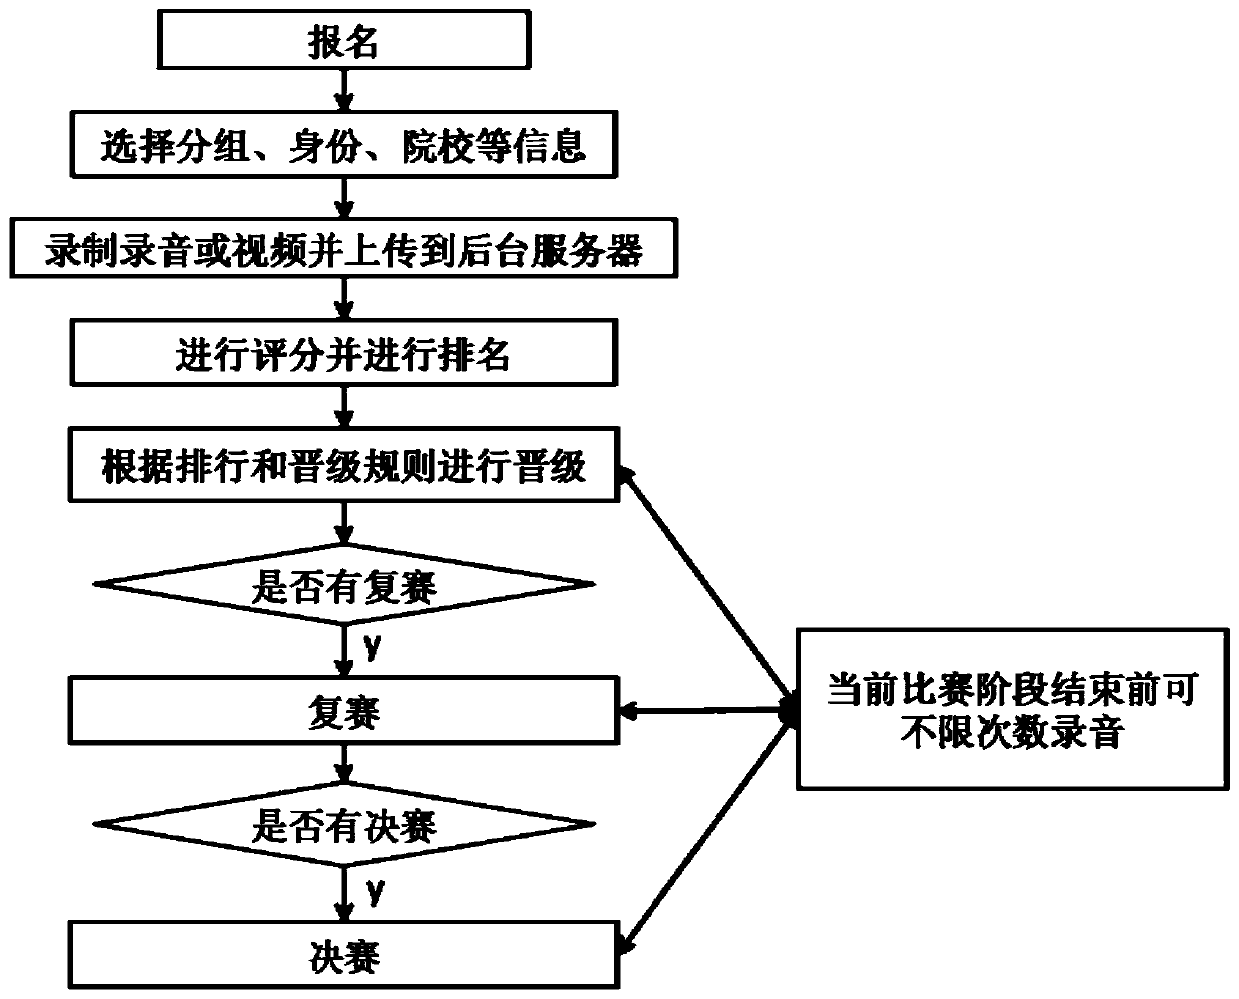 English learning system and method based on electronic resource library